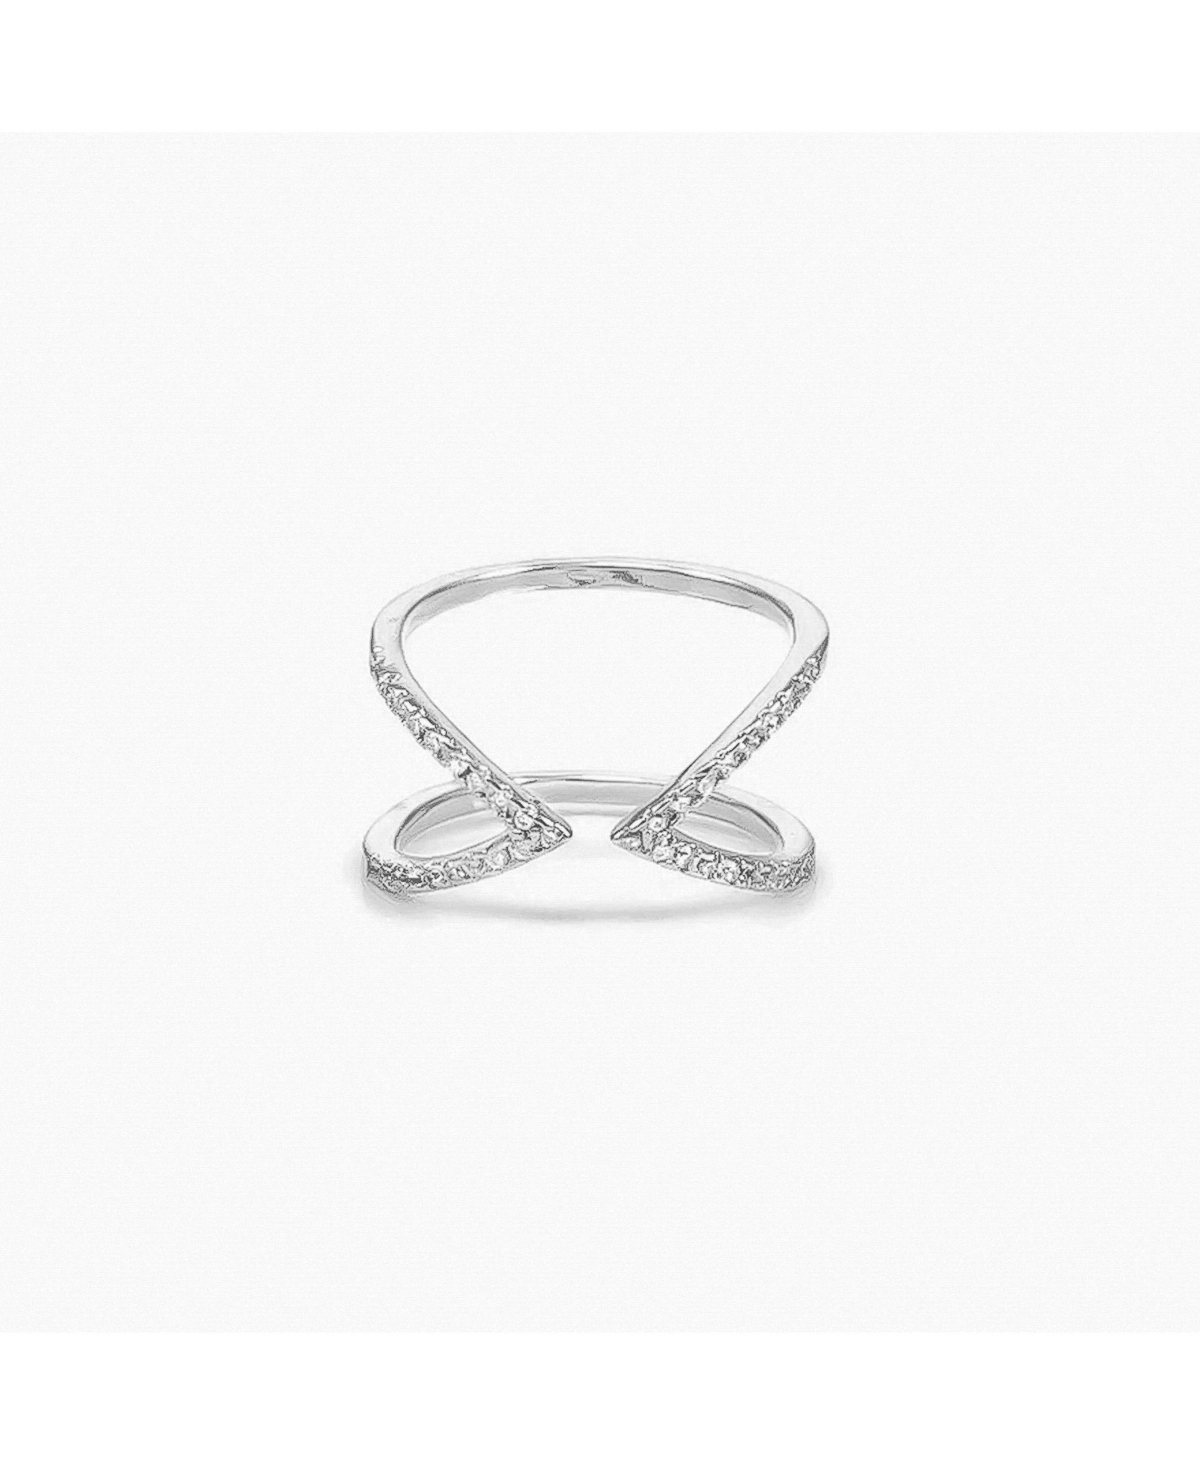 Claire Statement Adjustable Ring - Silver